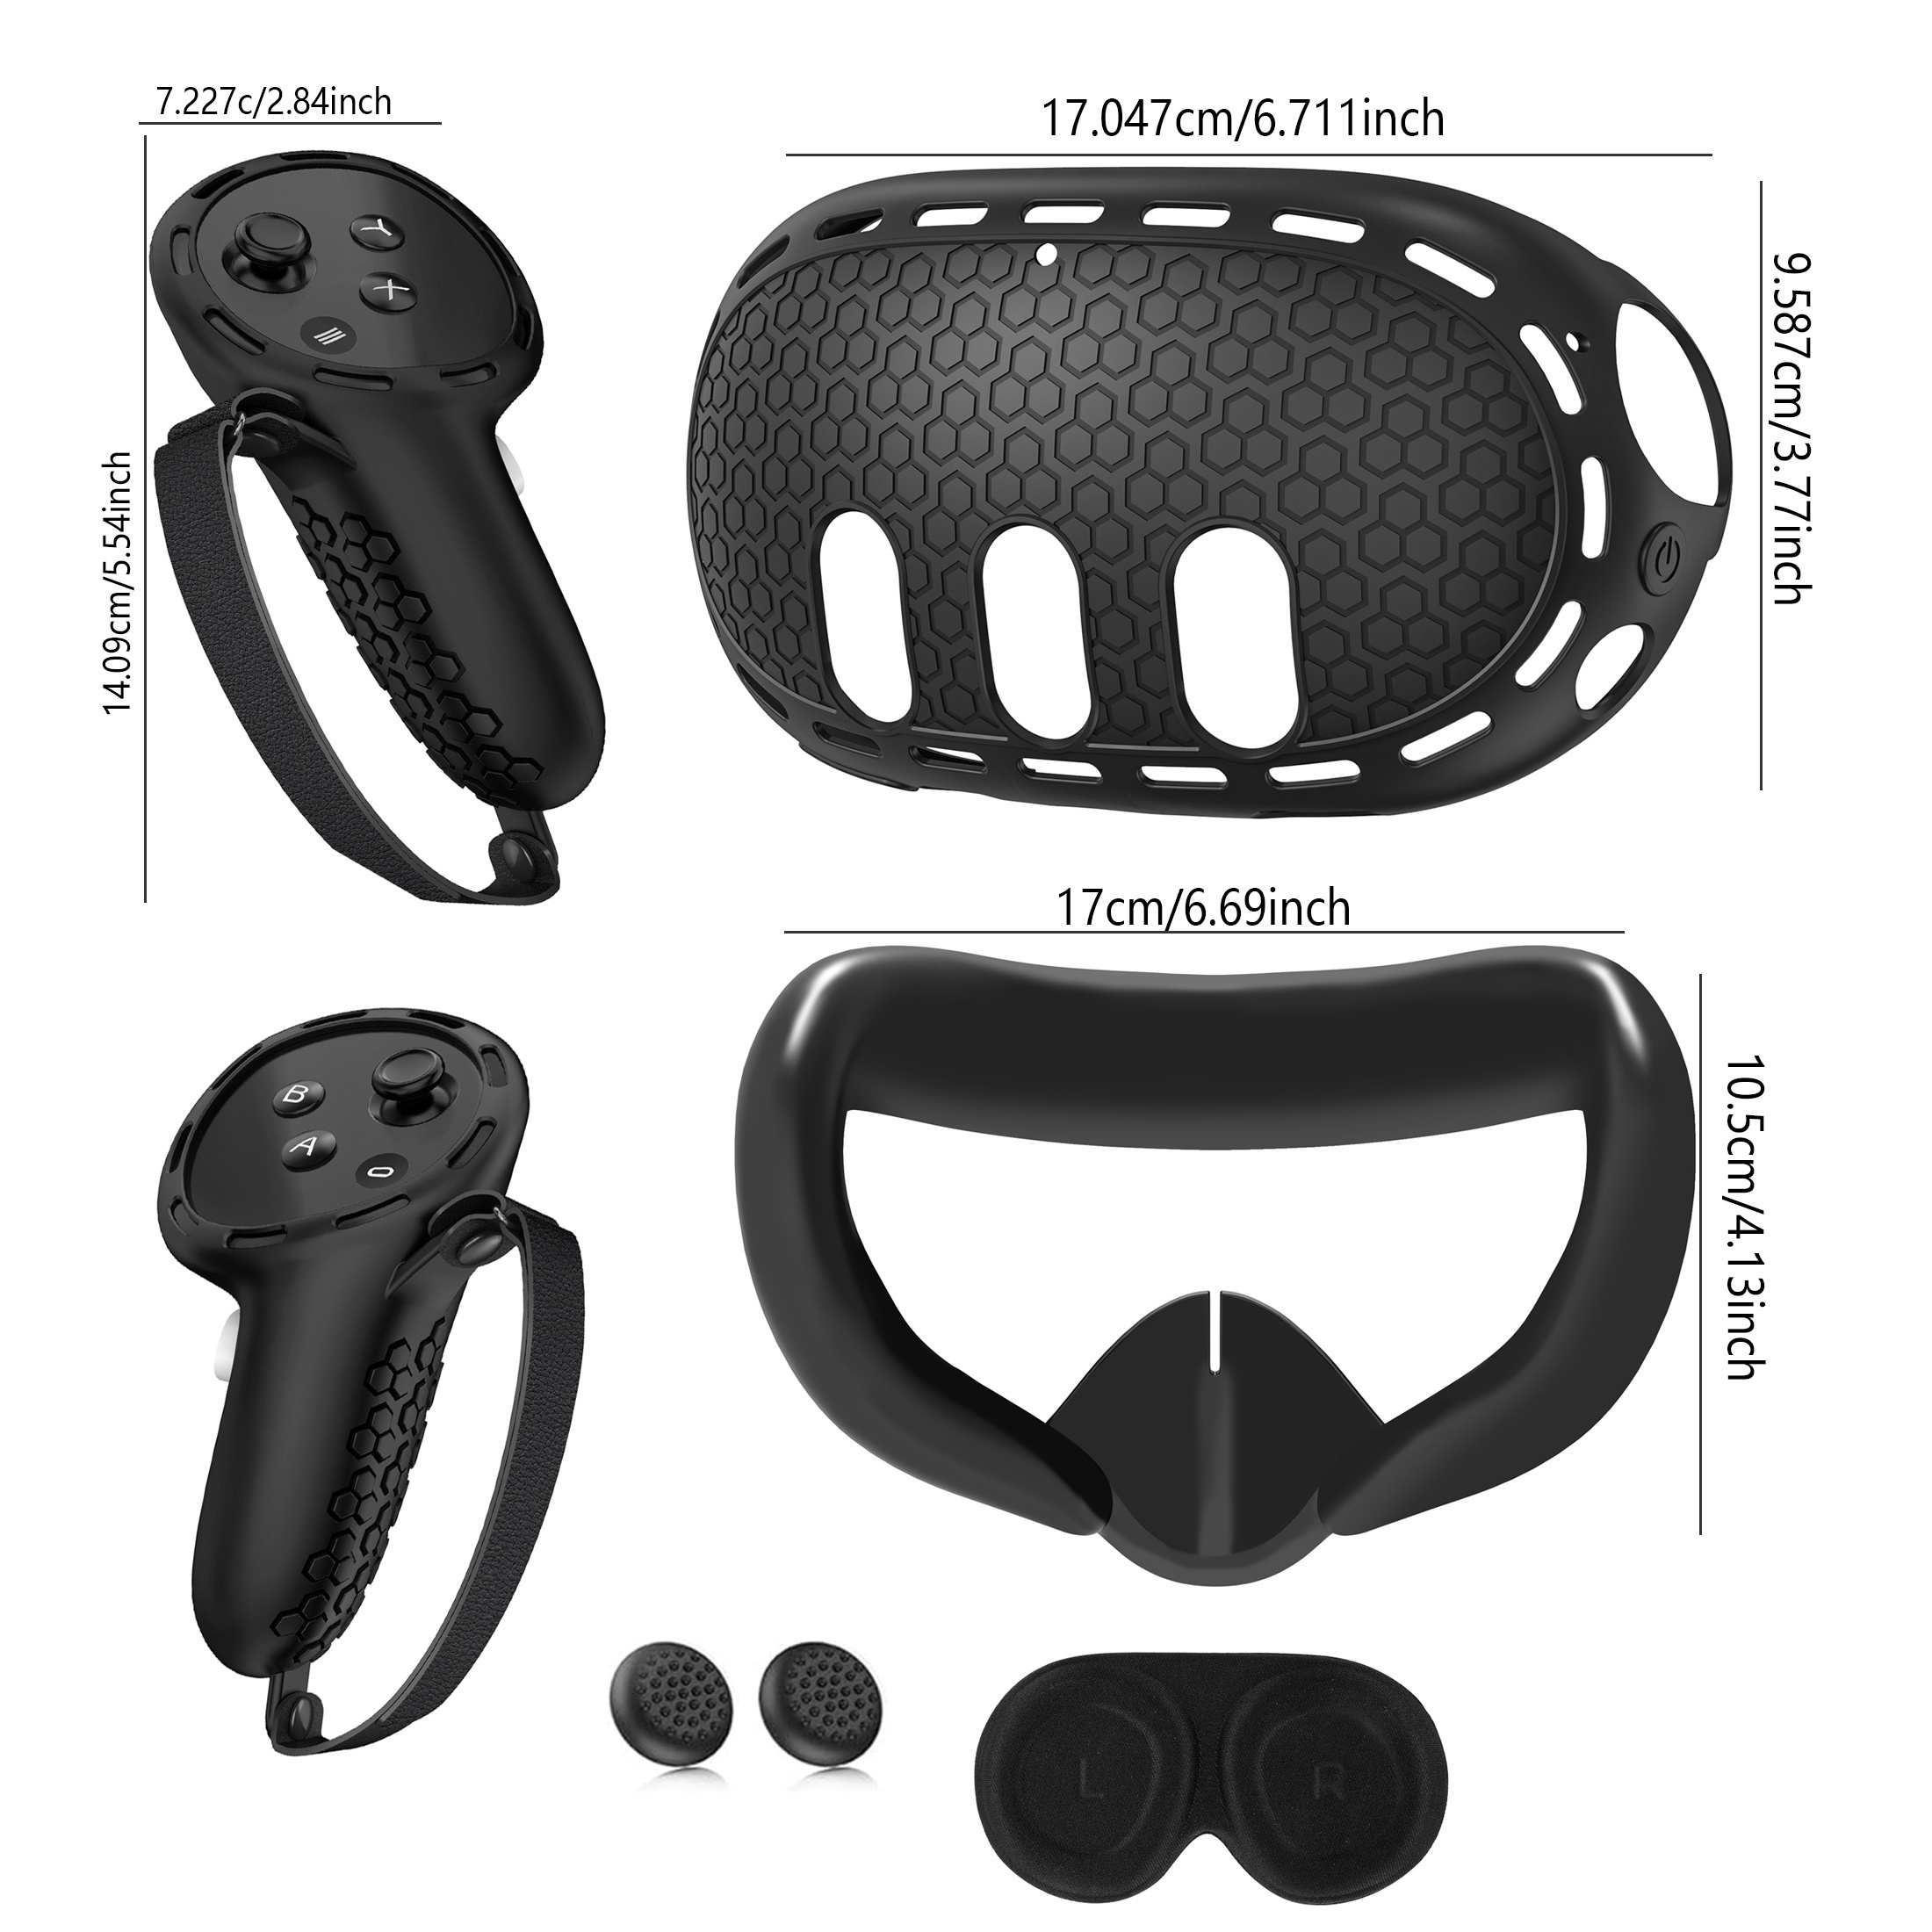 7pcs VR Accessories Set for Meta Quest 3, VR Accessories Protective Cover  Includes VR Face Cover,Controller Grips,Headset Cover, Lens Protector,  Quest